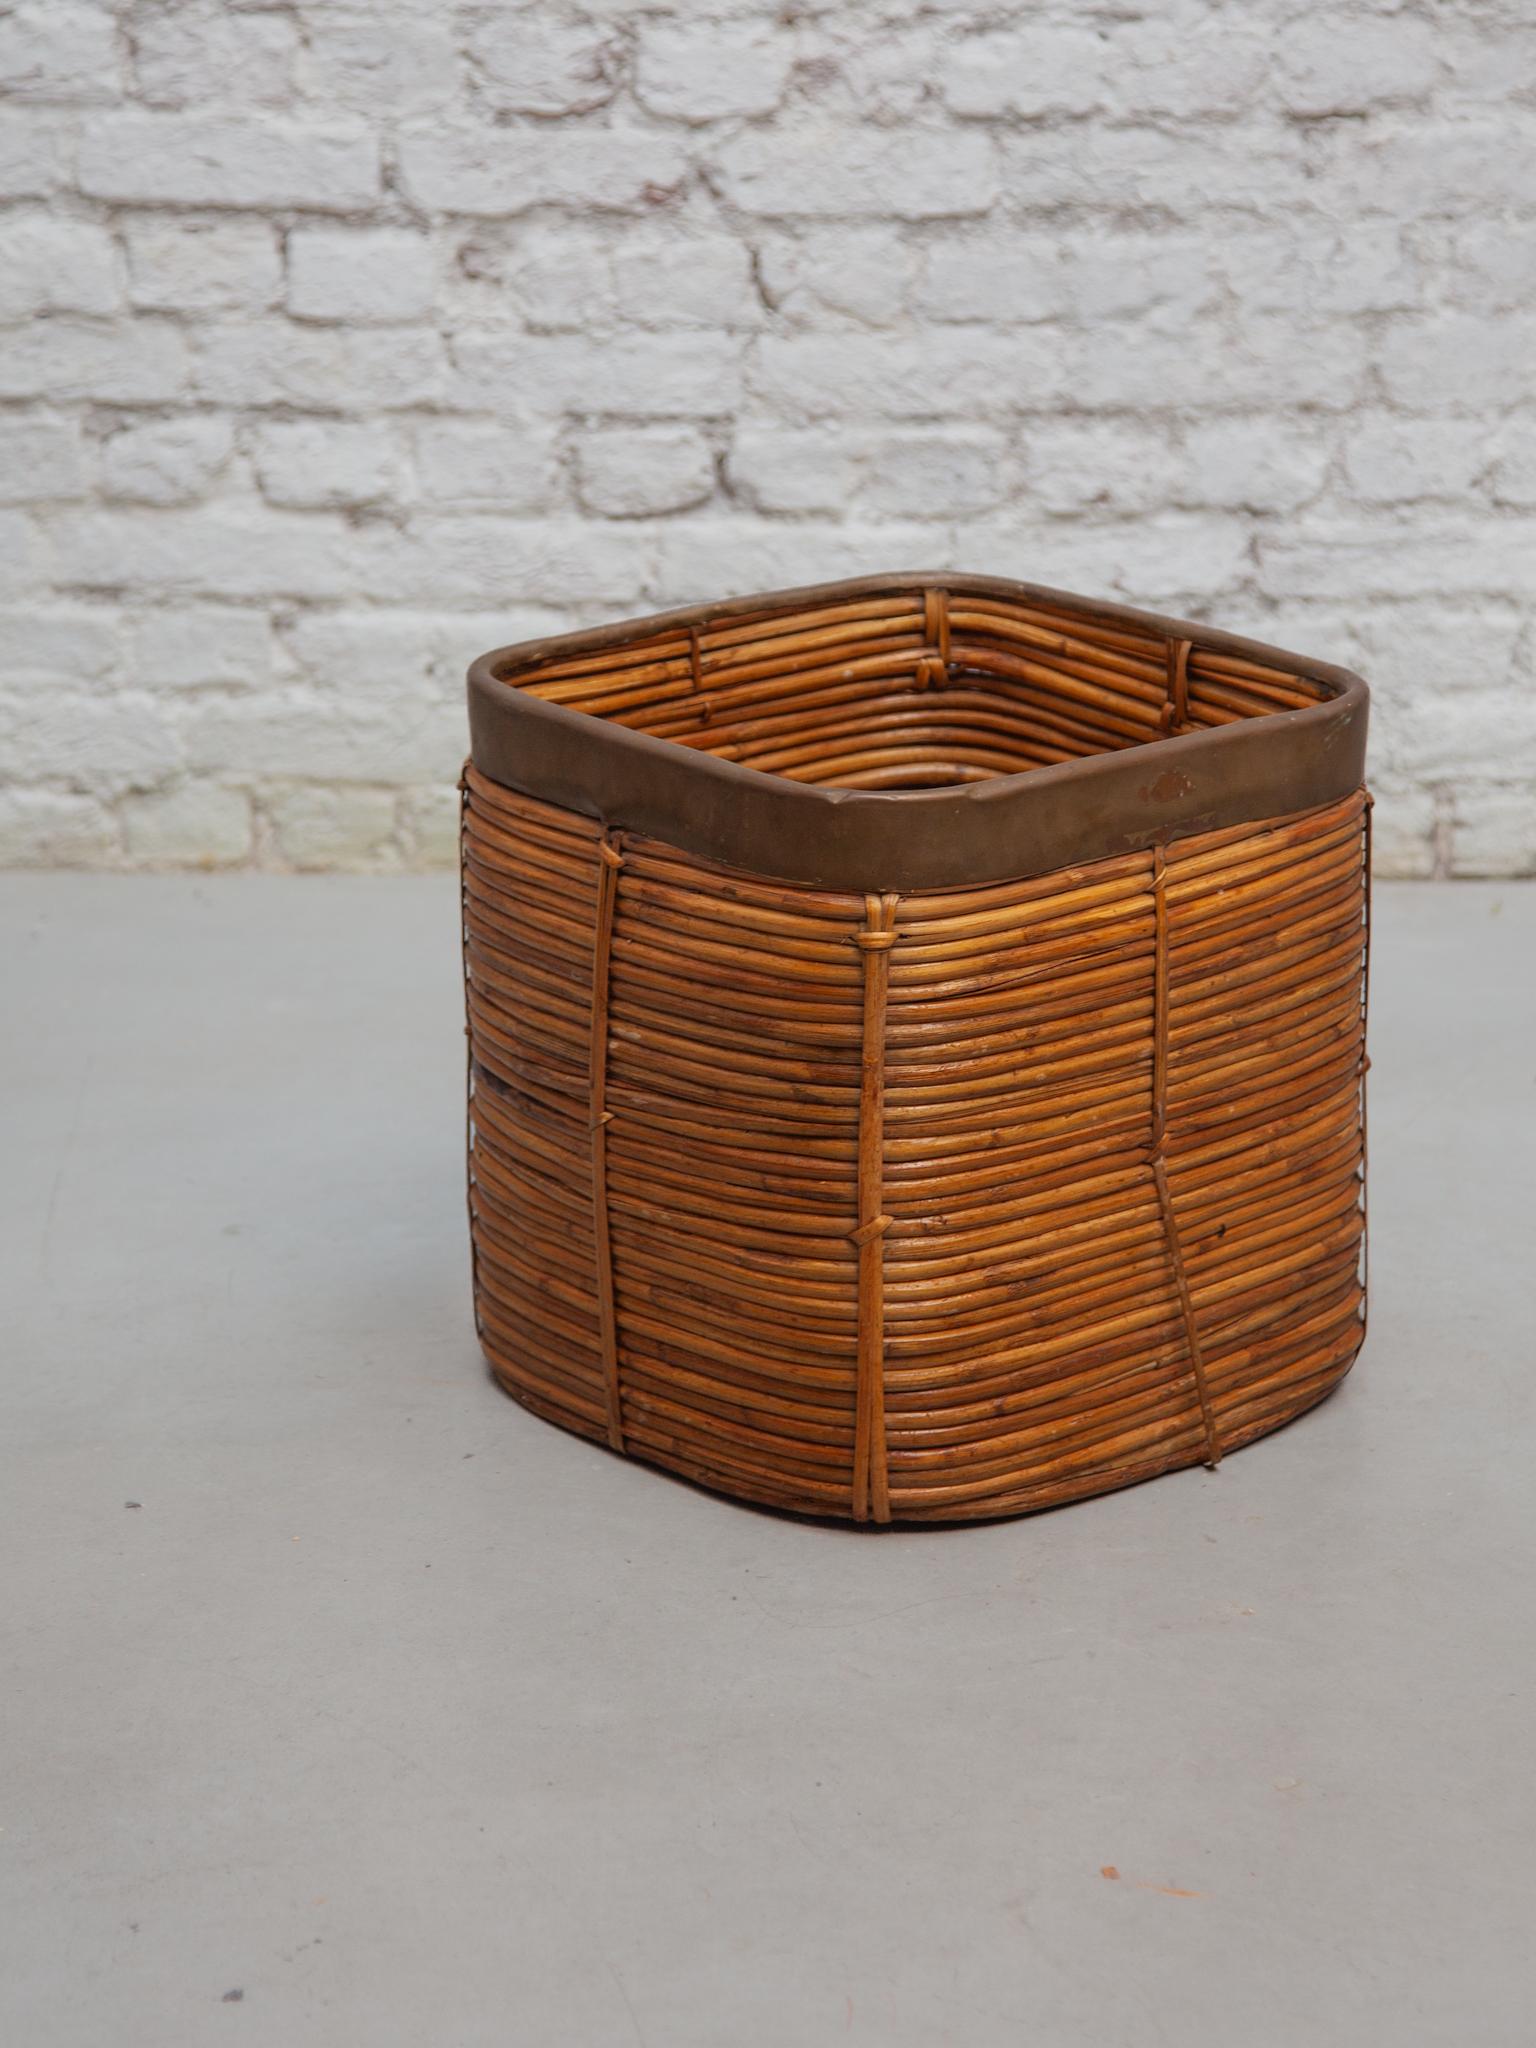 Large Mid-Century Gabriella Crespi Style Brass & Rattan Bamboo Cube Planter For Sale 1